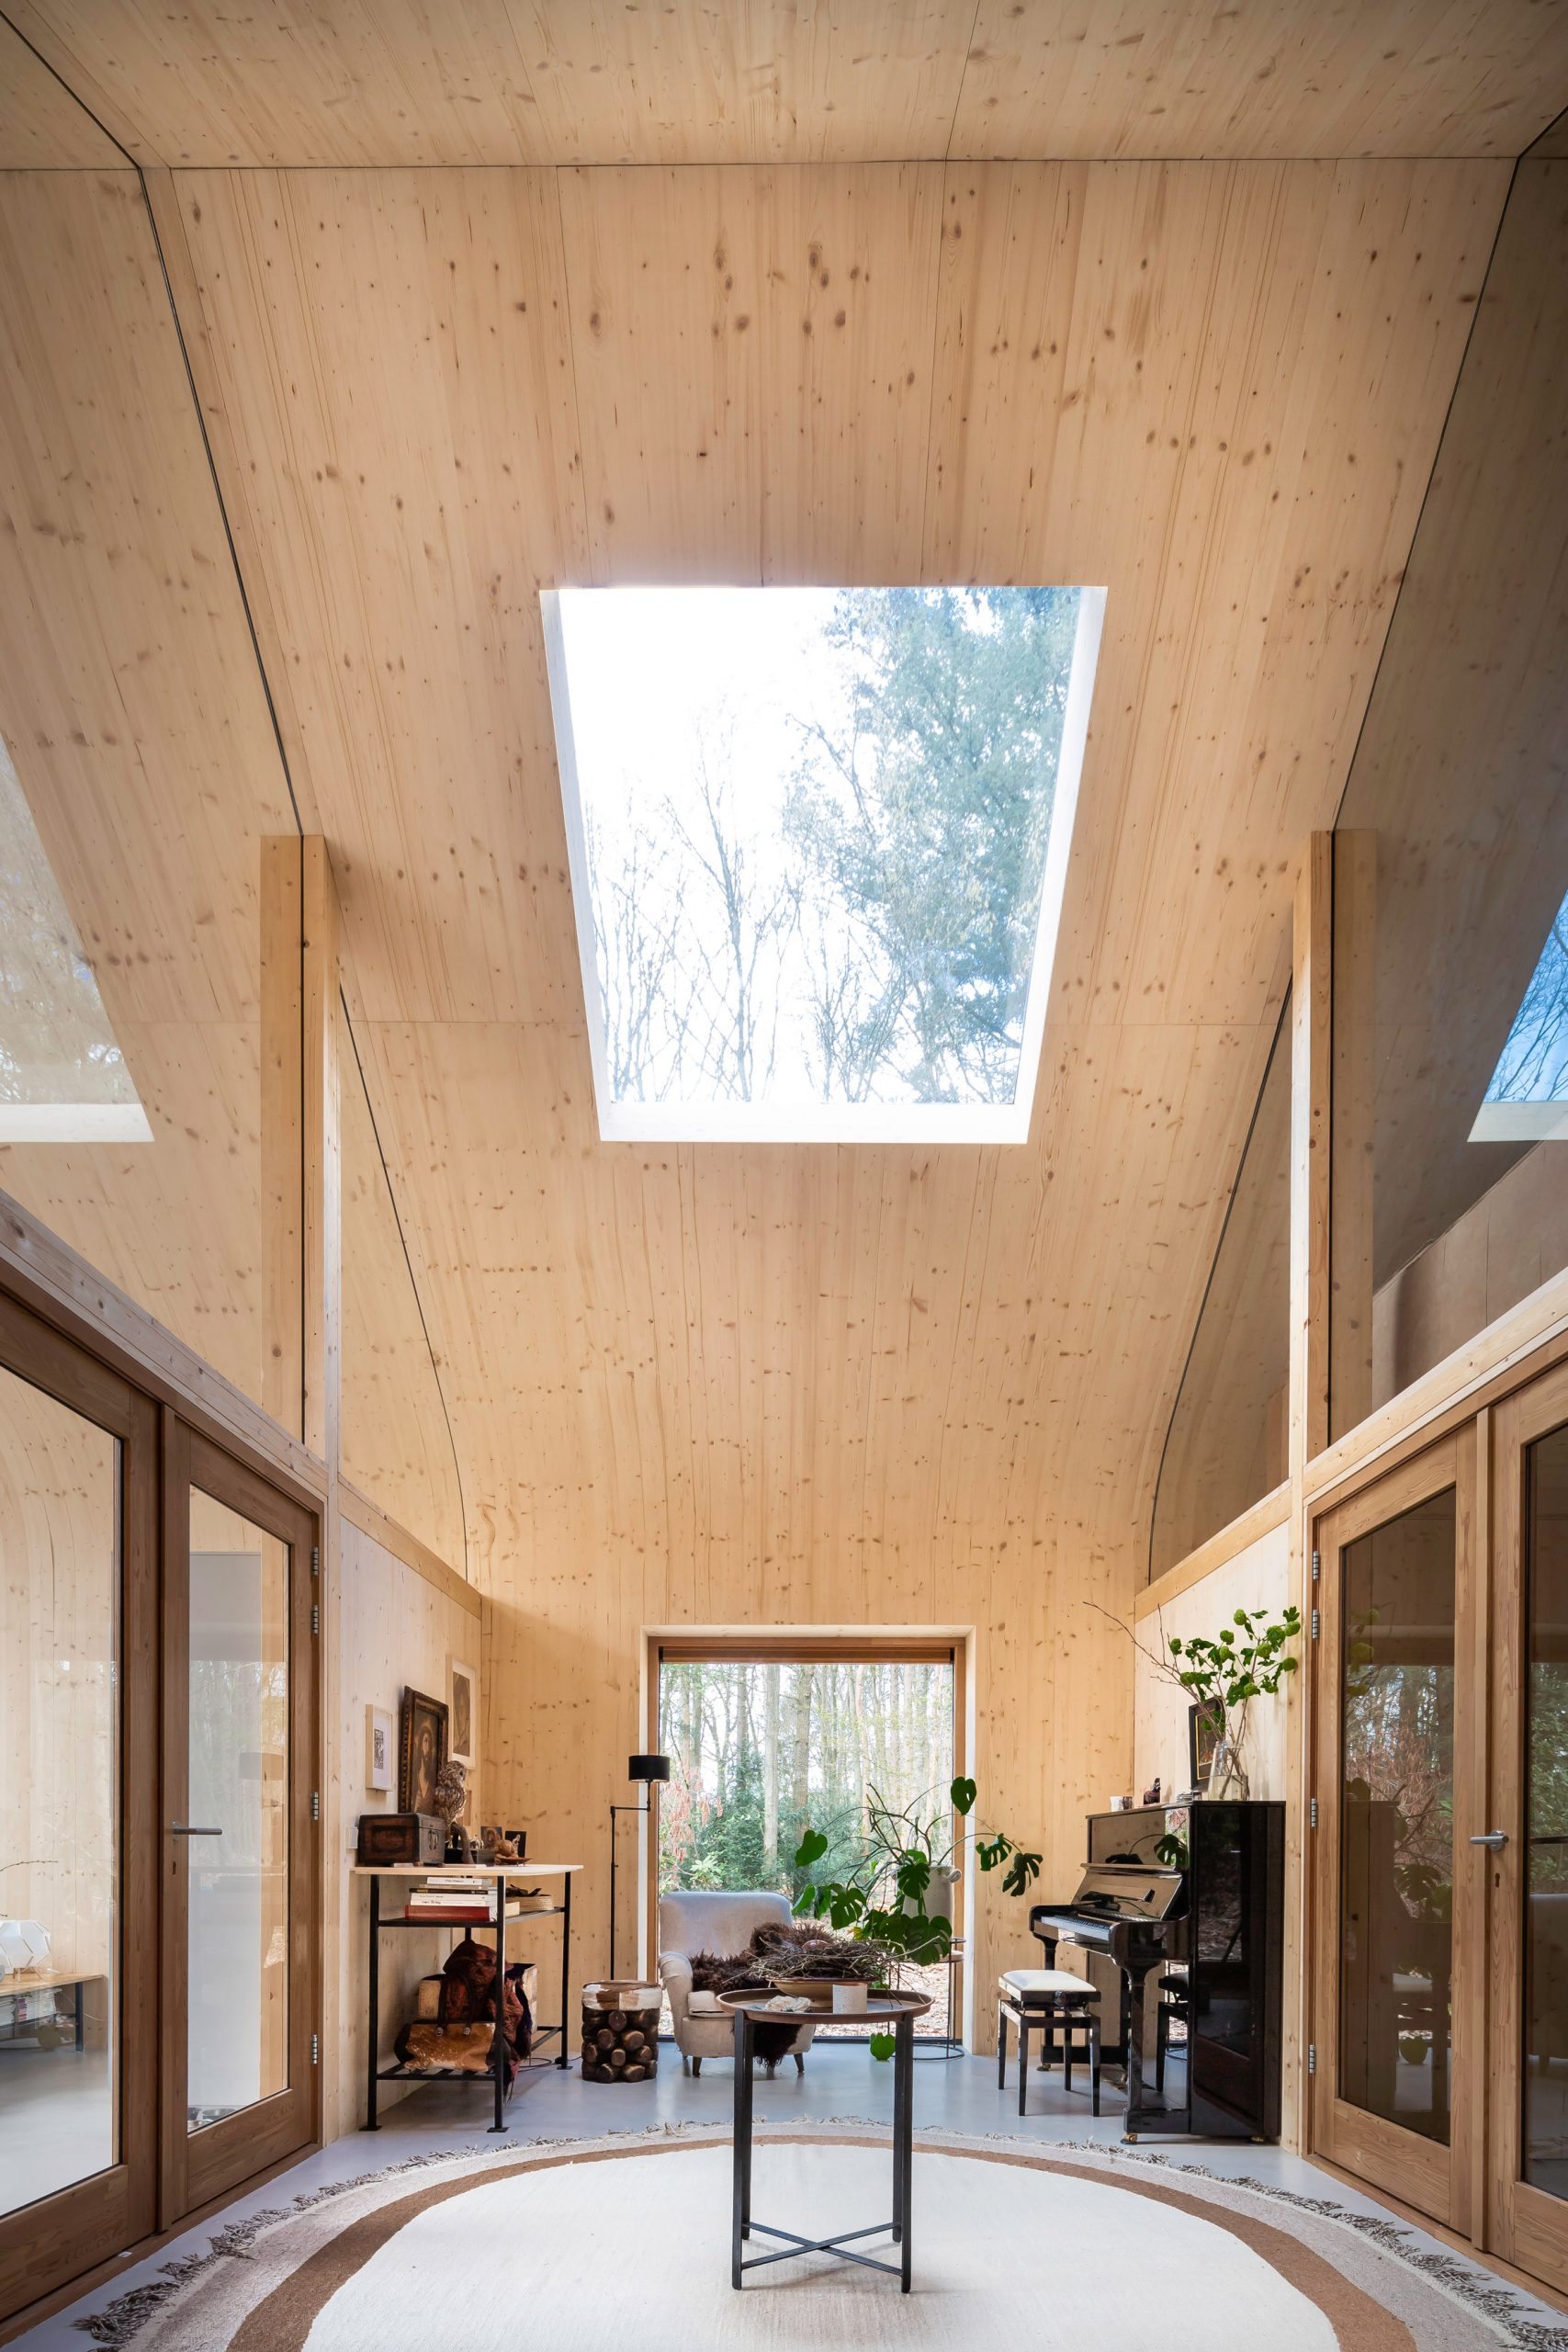 A hallway in a prefabricated wooden cabin